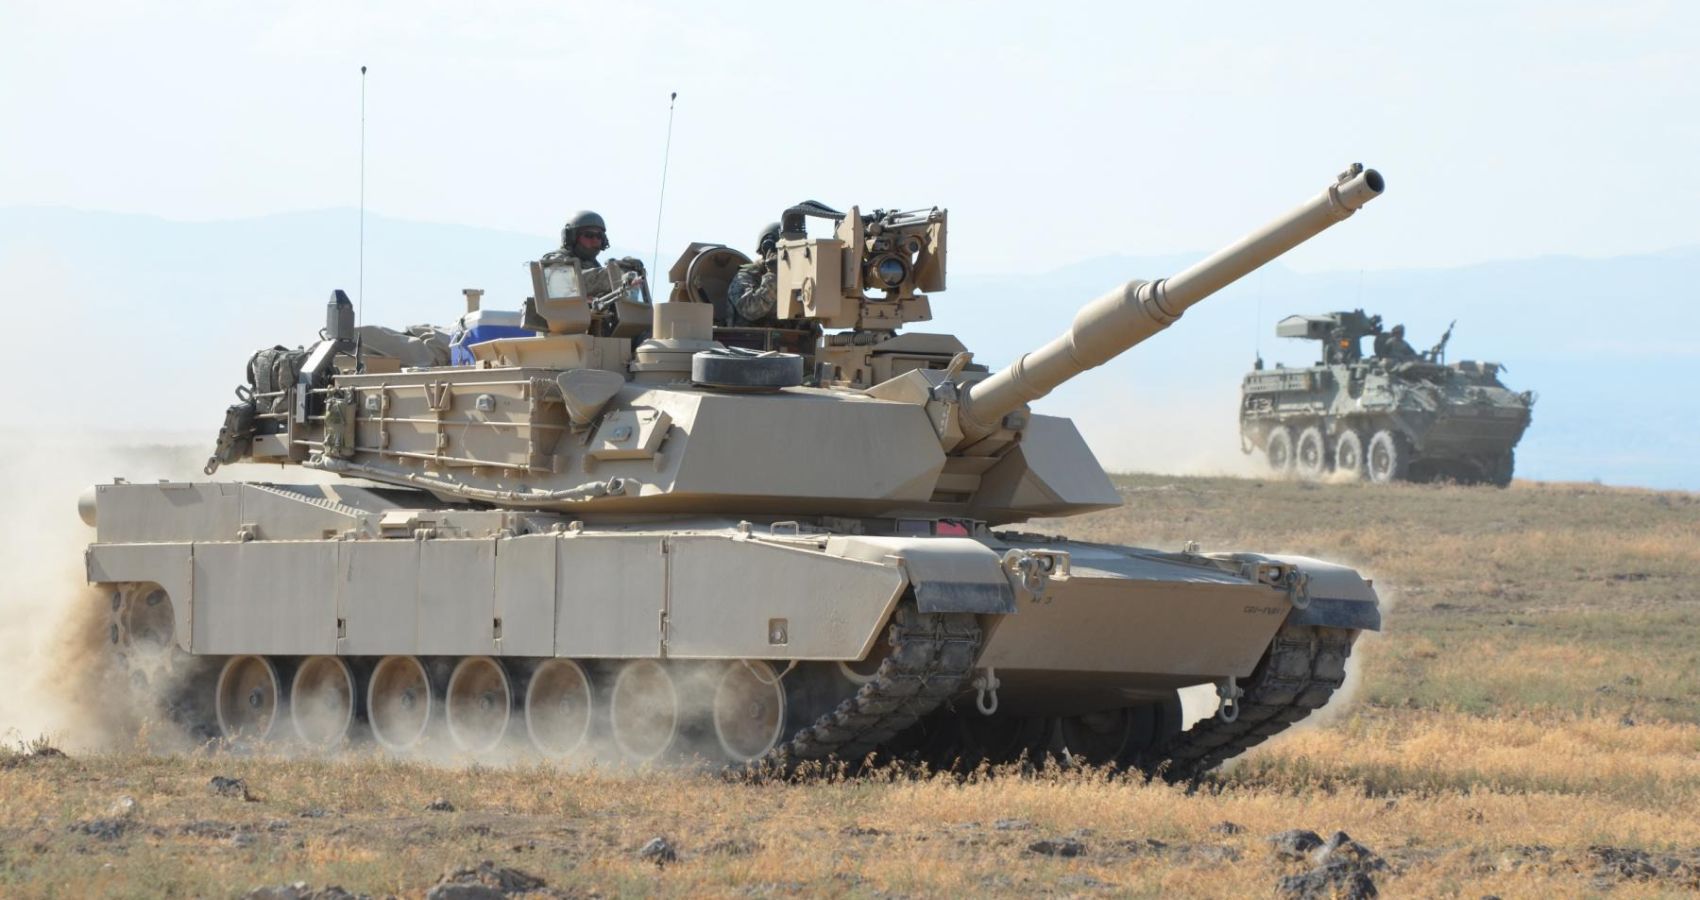 What Makes The M1A2 The World's Most Advanced Abram Battle Tank